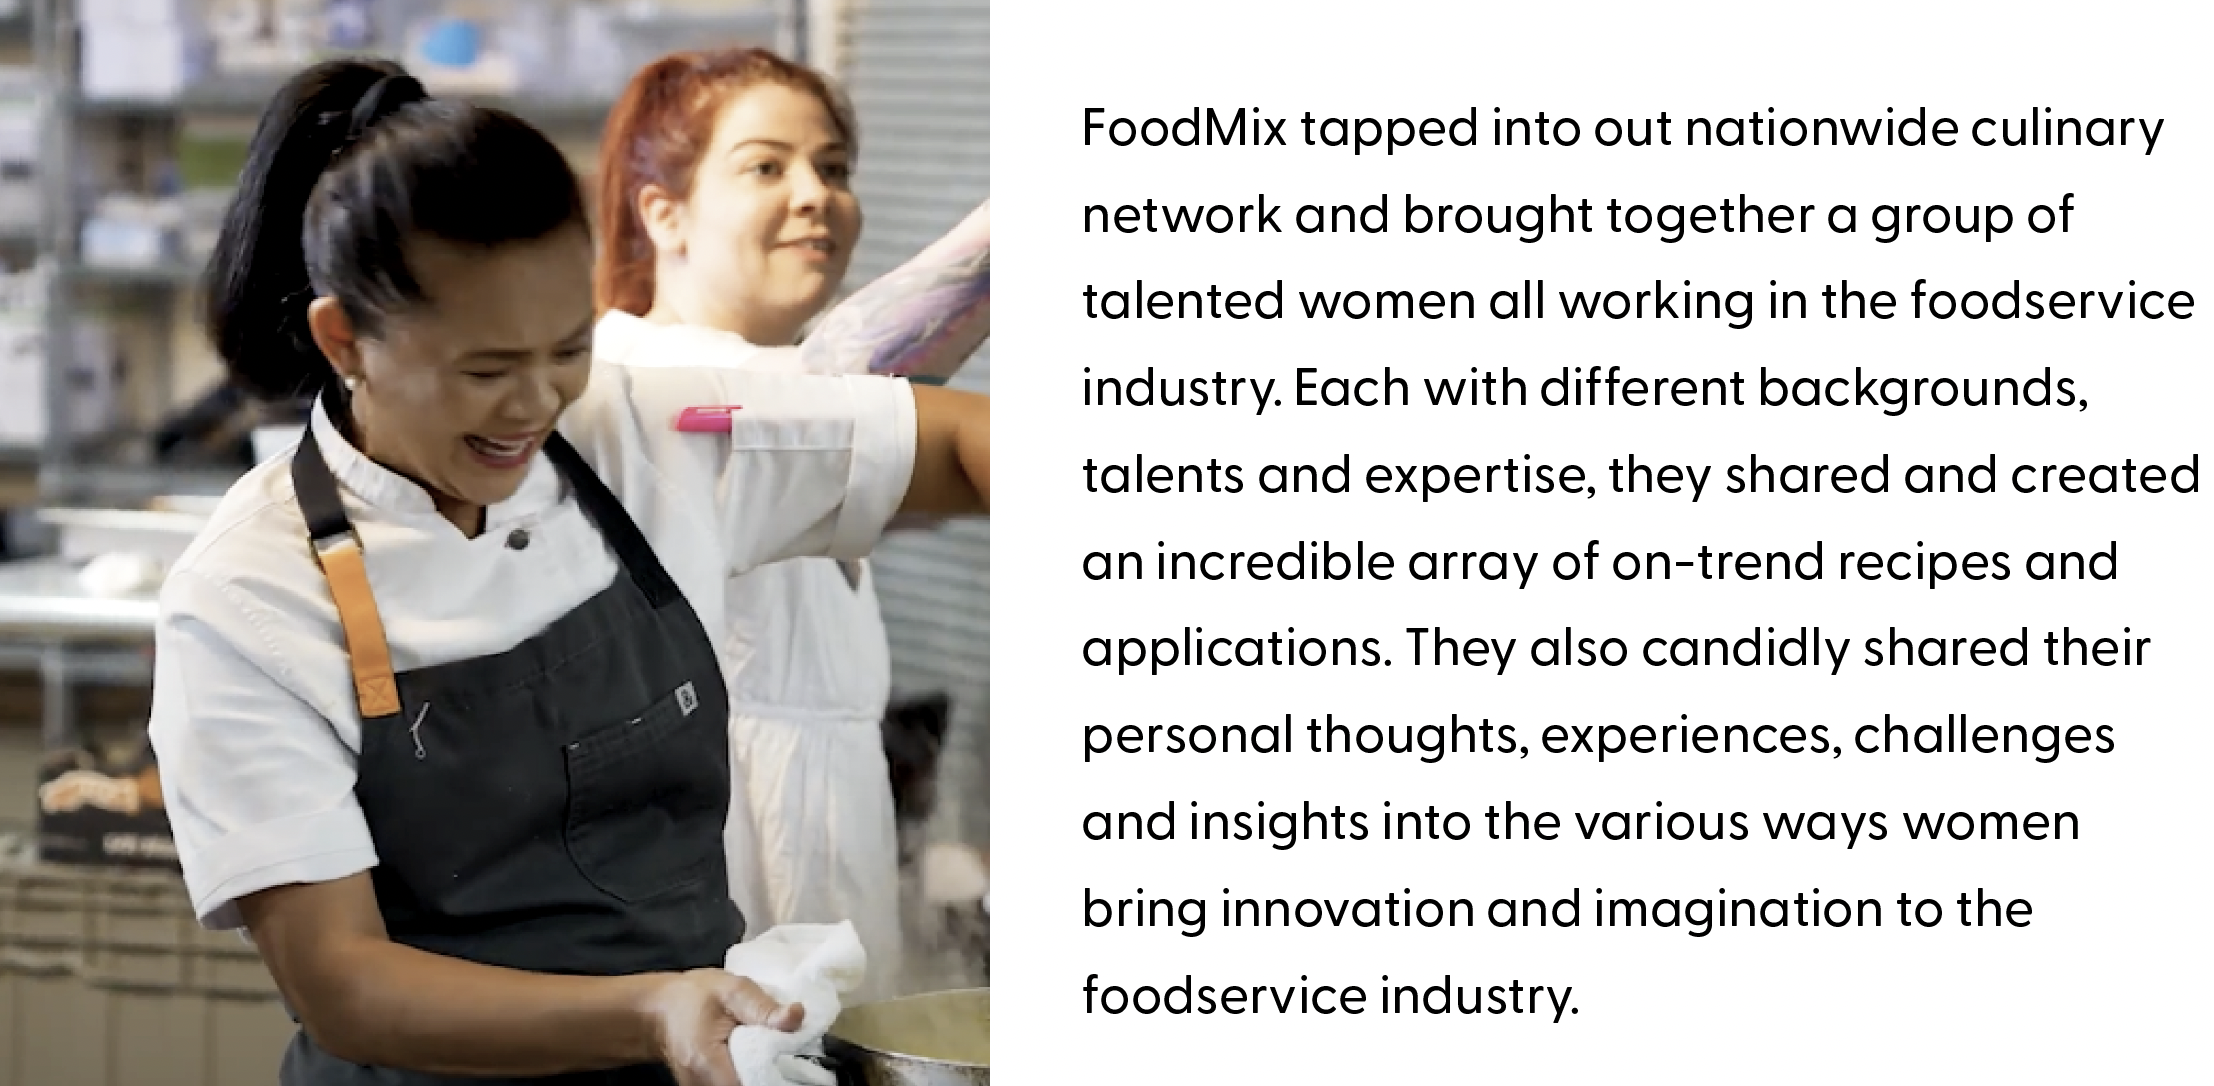 FoodMix Campaign for Smithfield Foodservice